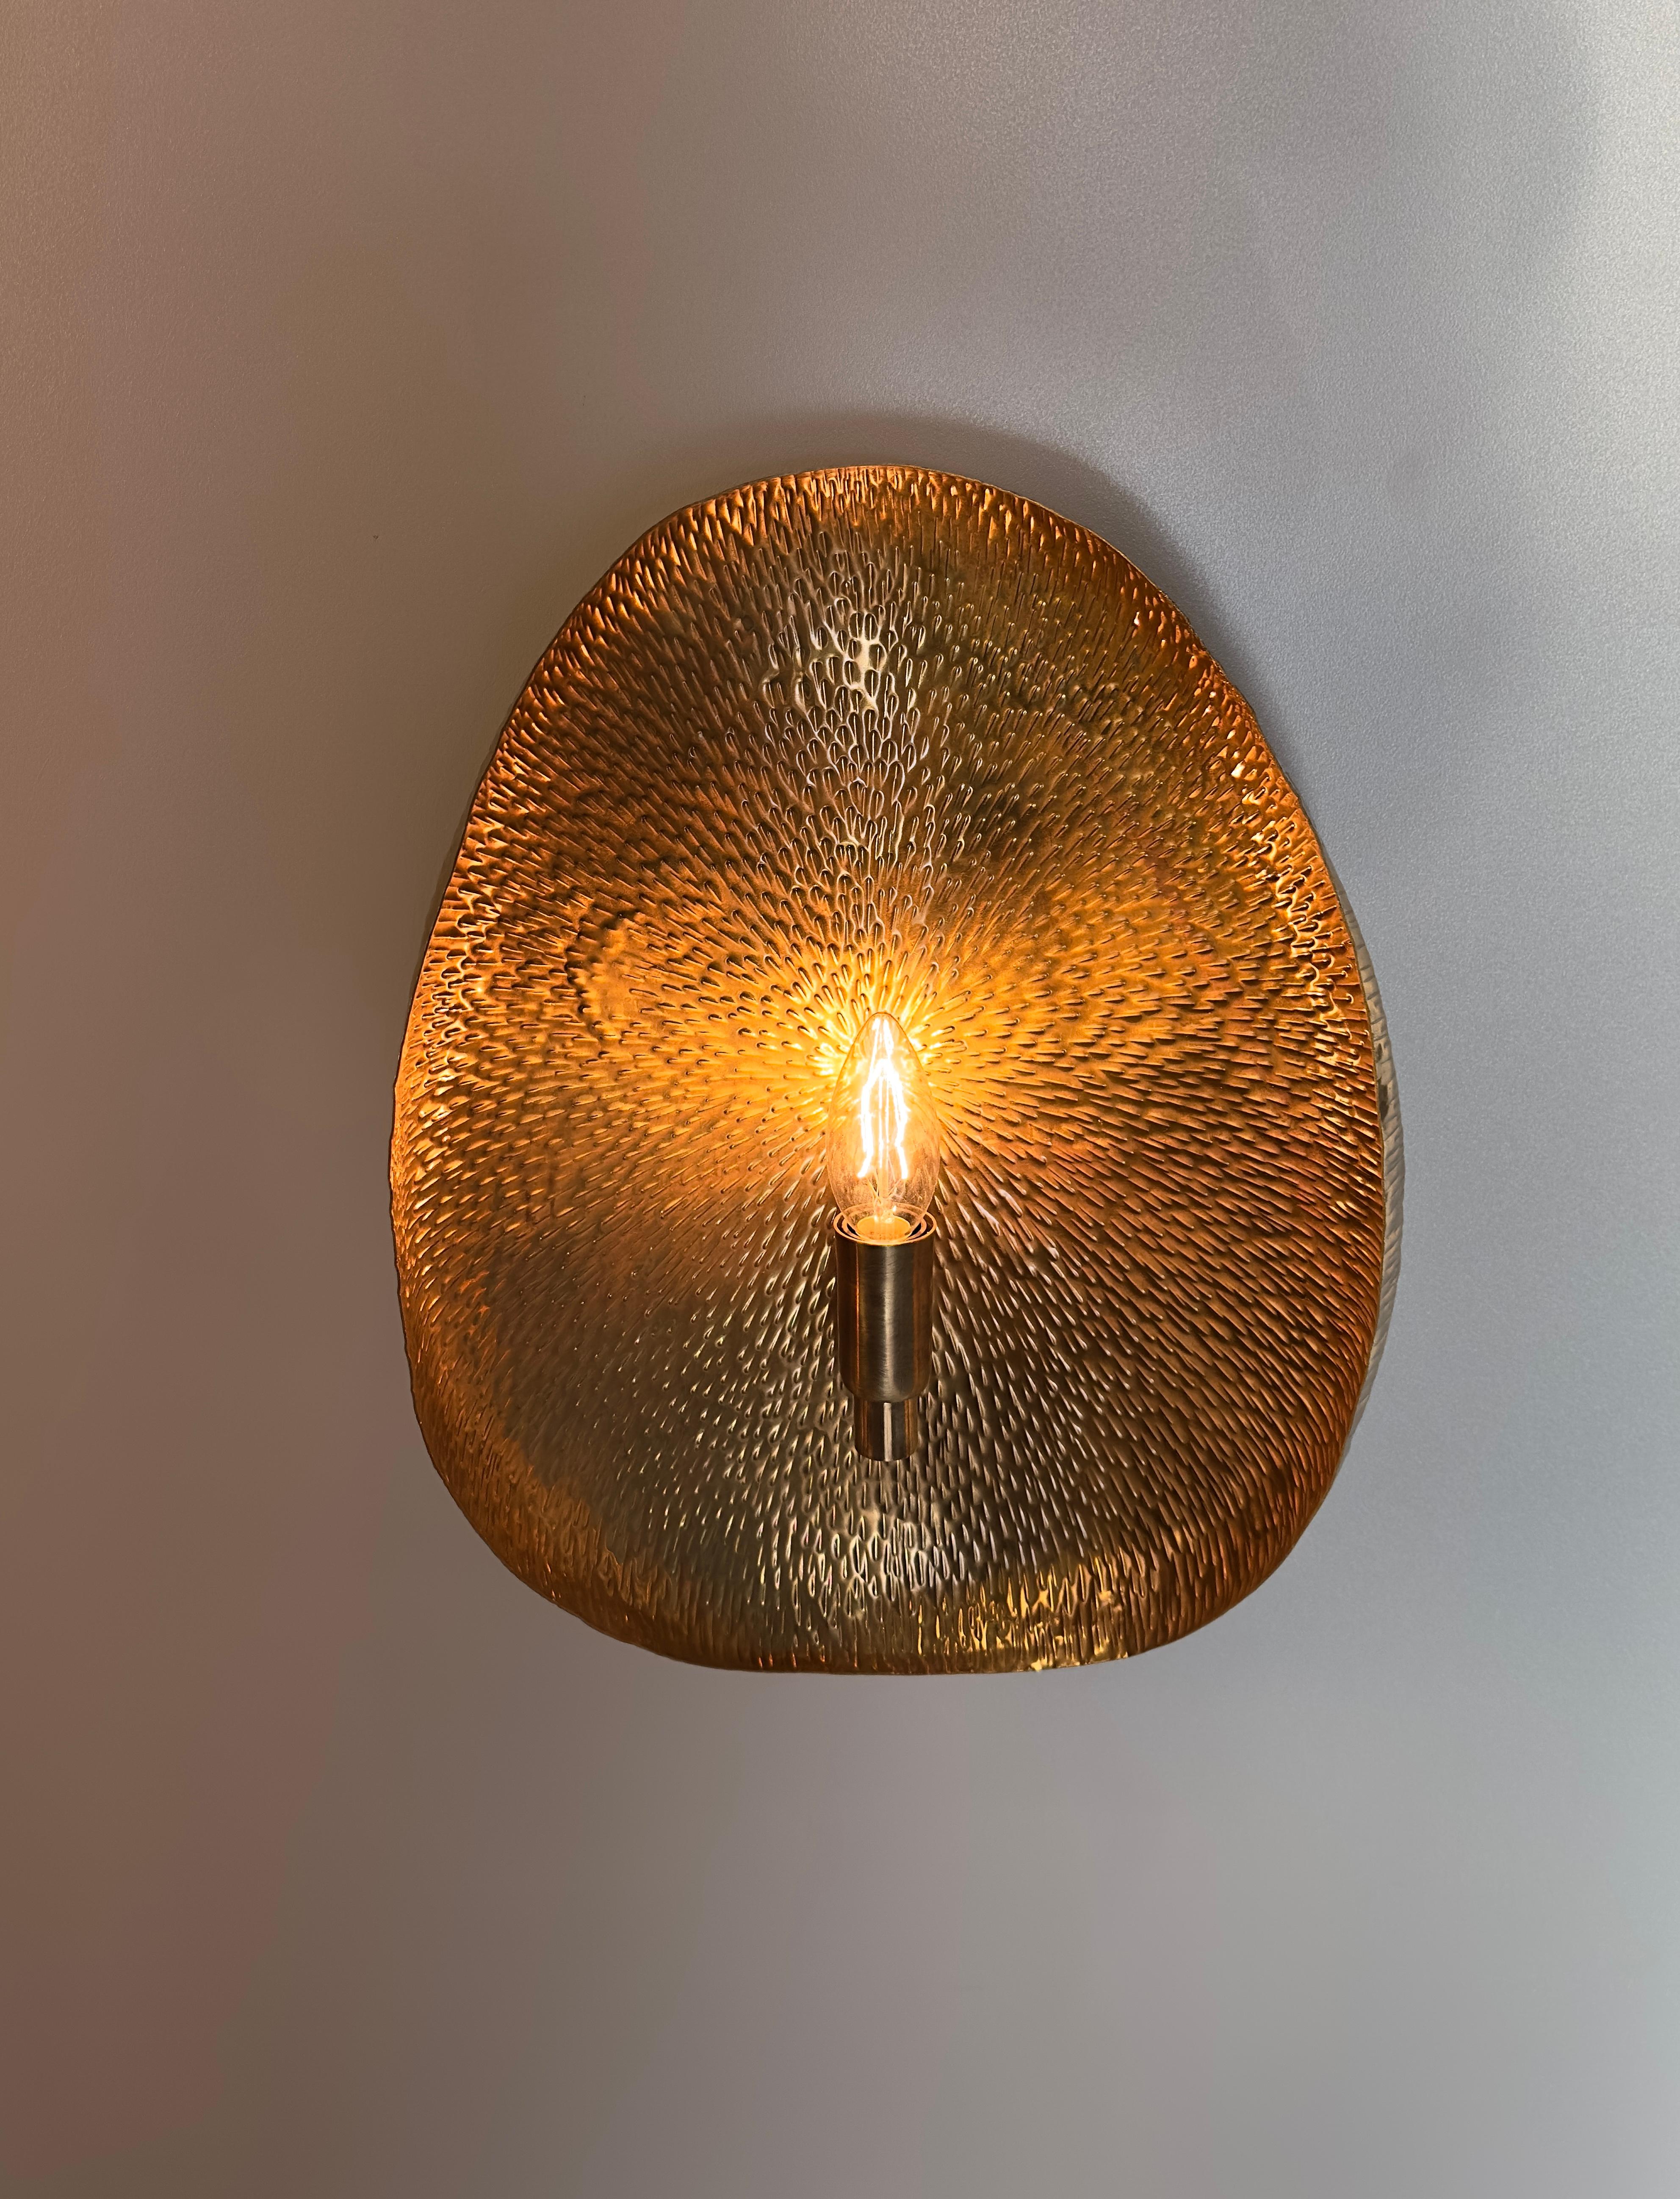 PALMA Wall Sconce, a stunning lighting fixture that is sure to add a touch of elegance and sophistication to any space. Handmade with delicate precision, this sconce is crafted from a hammered brass sheet, carefully formed into a sphere